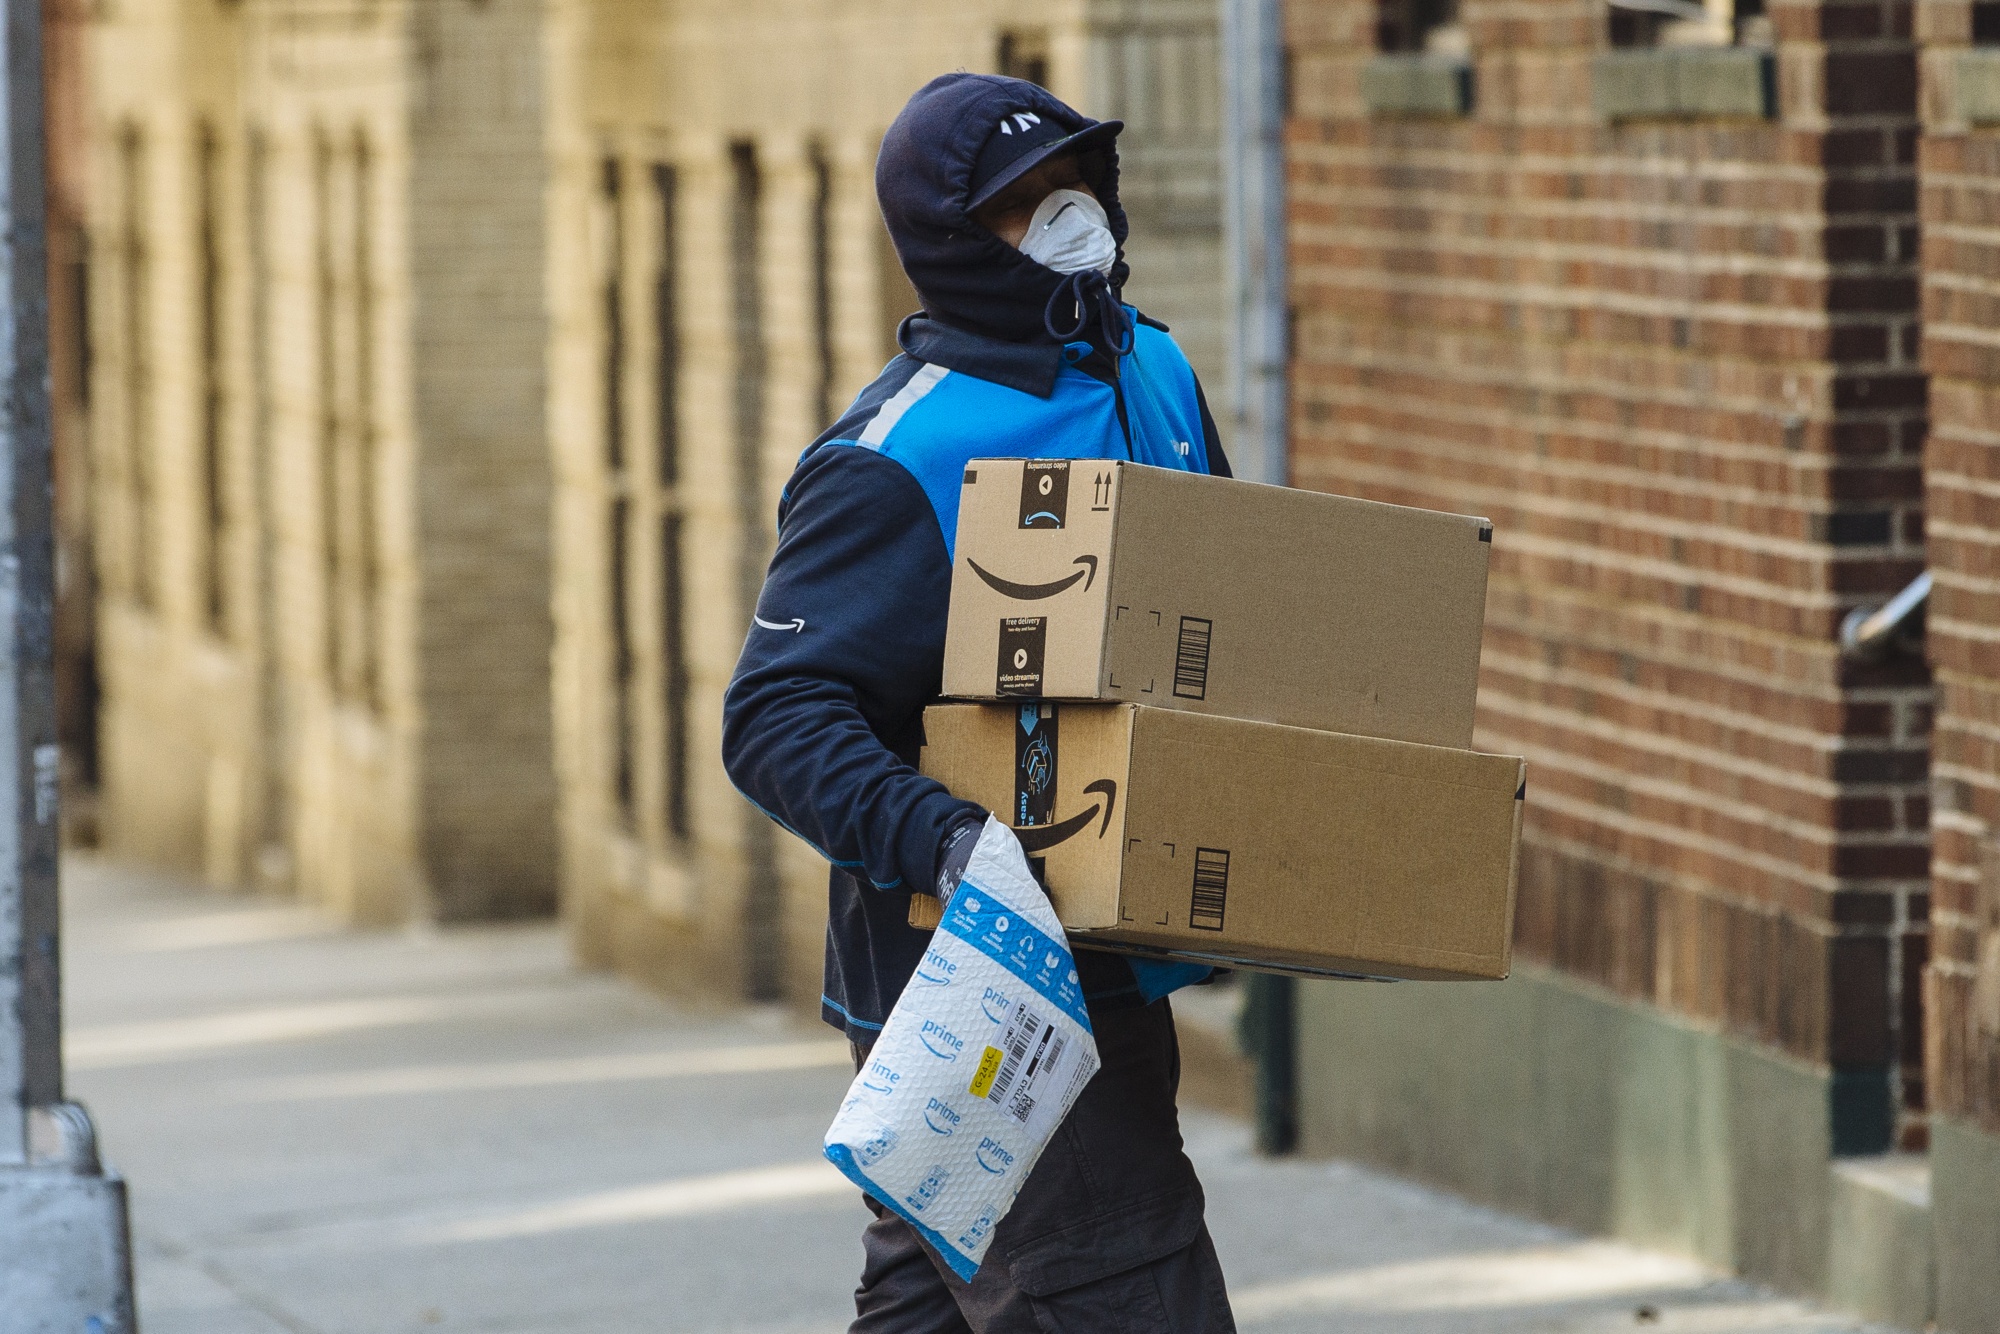 A worker carries Amazon boxes during a delivery in the Bronx, New York on March 26.